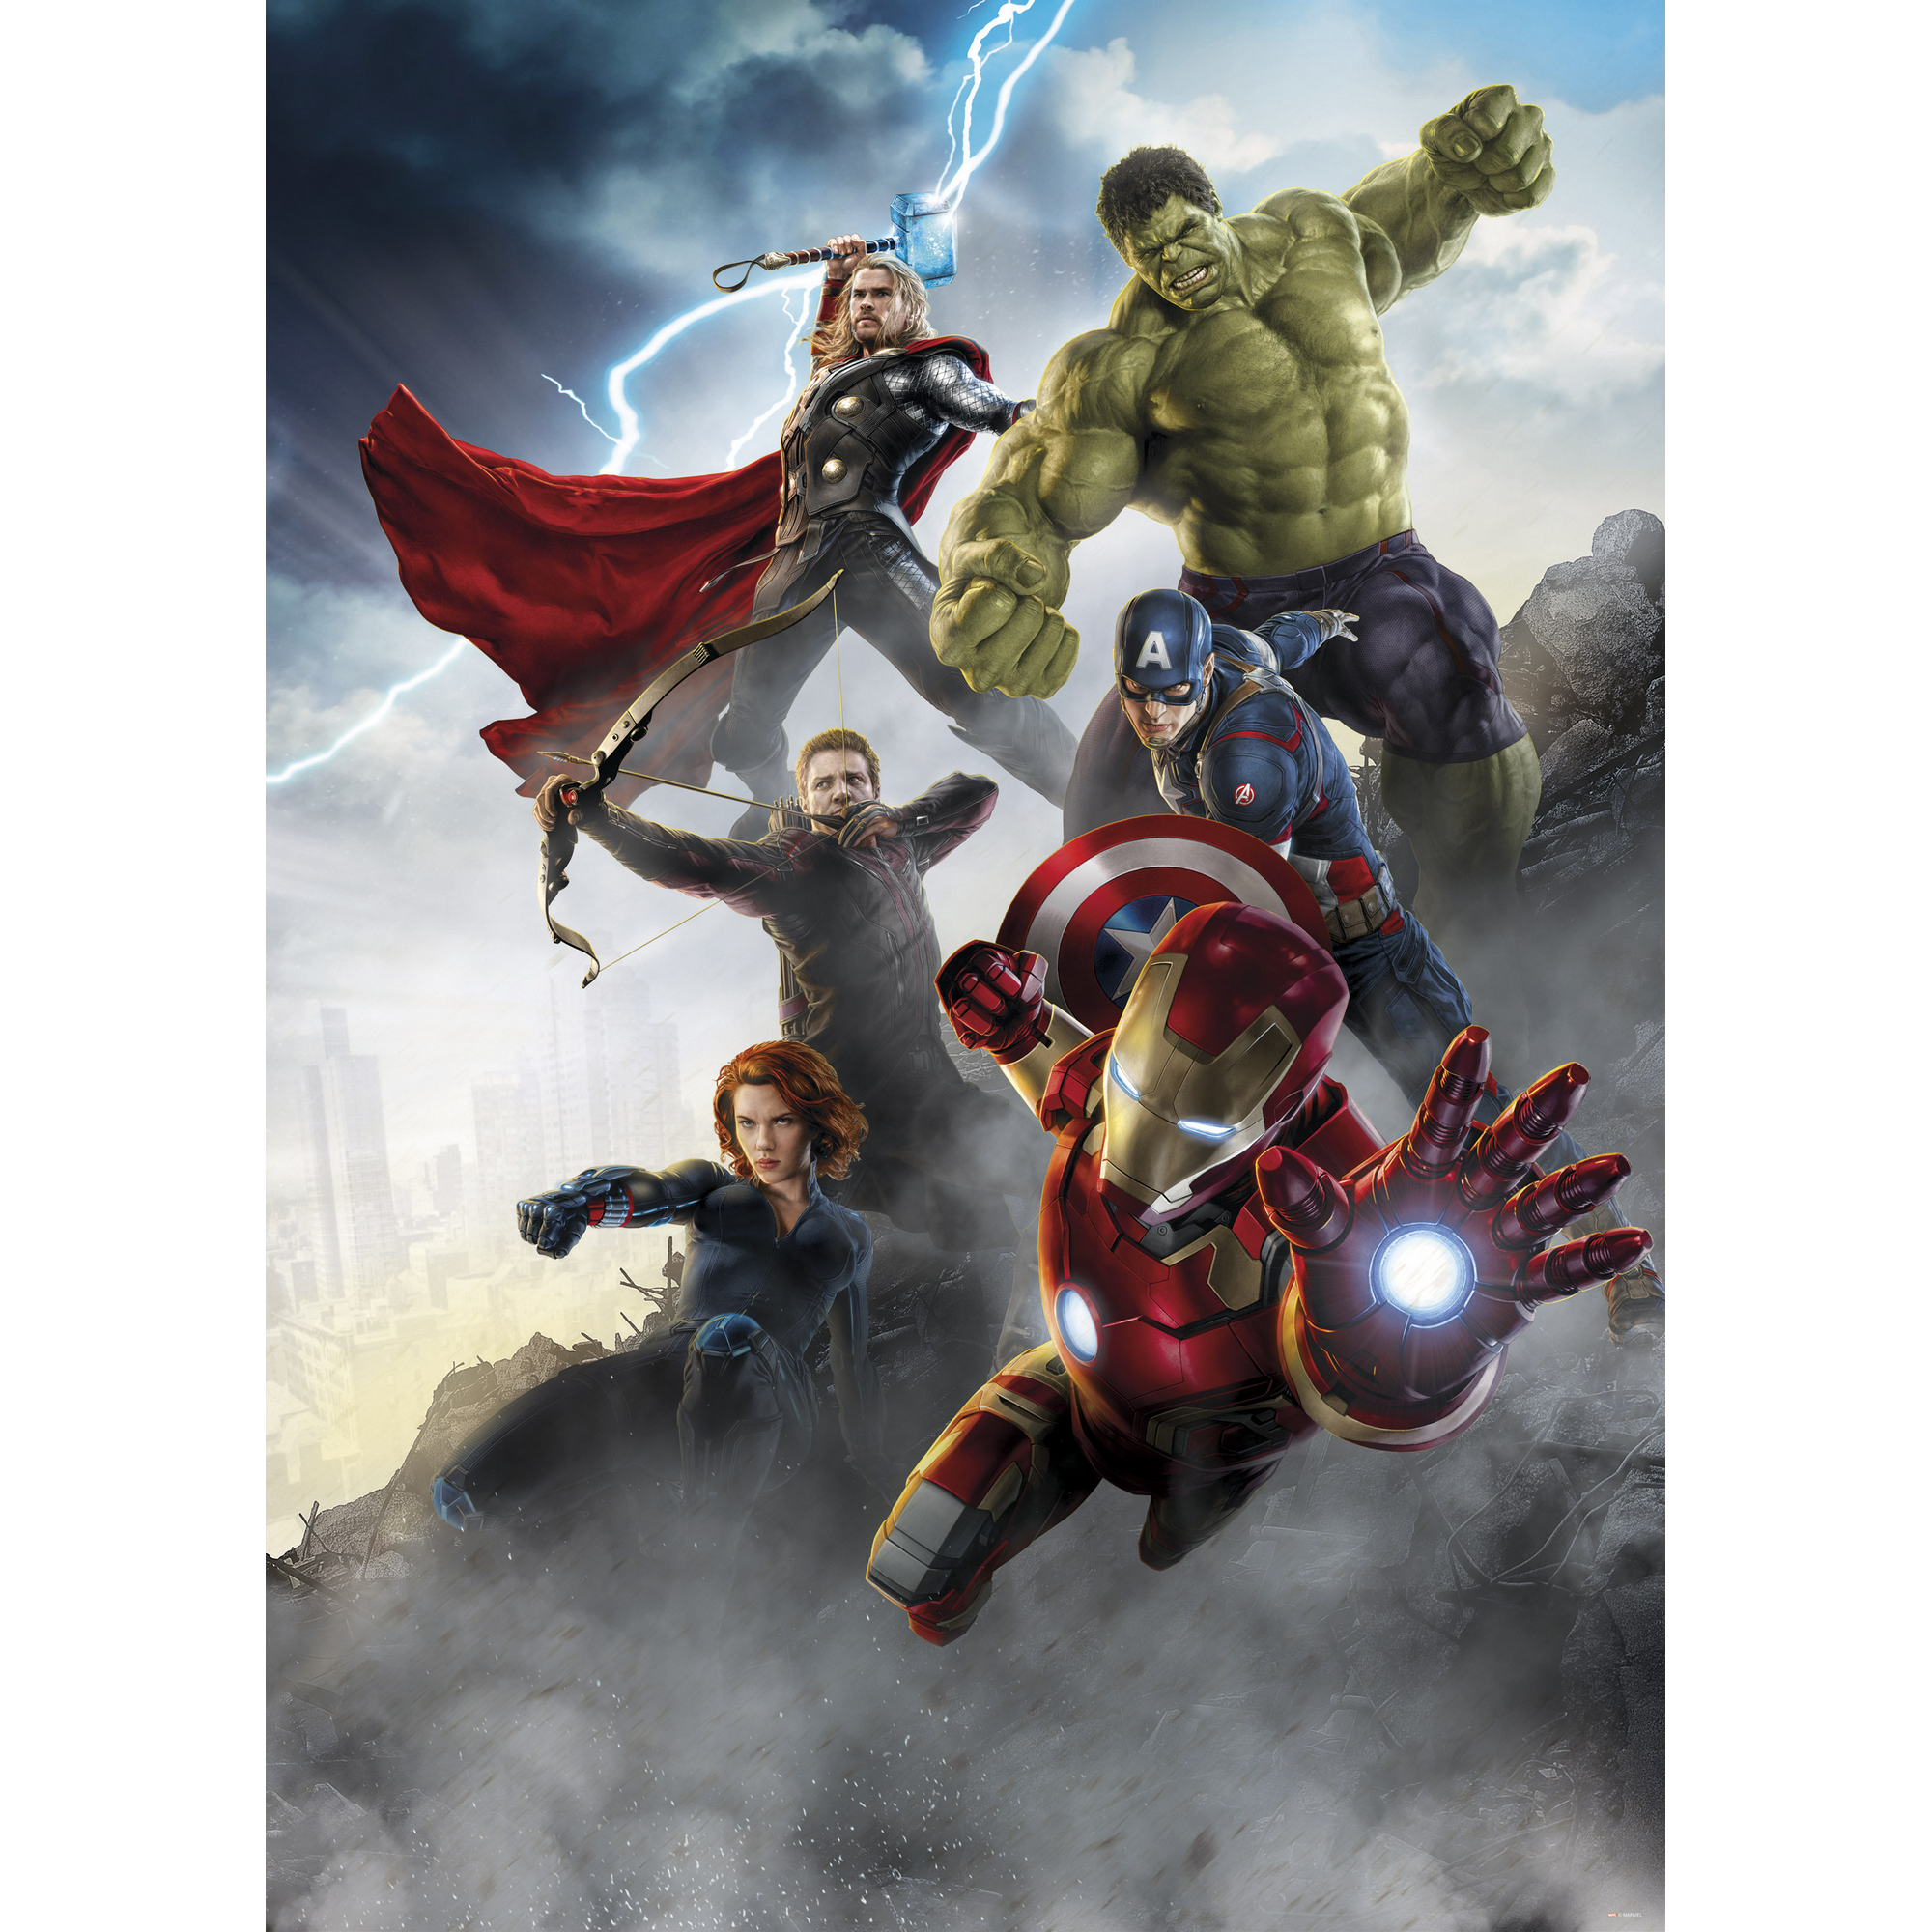 Fototapete 'Avengers Age of Ultron' 184 x 254 cm + product picture